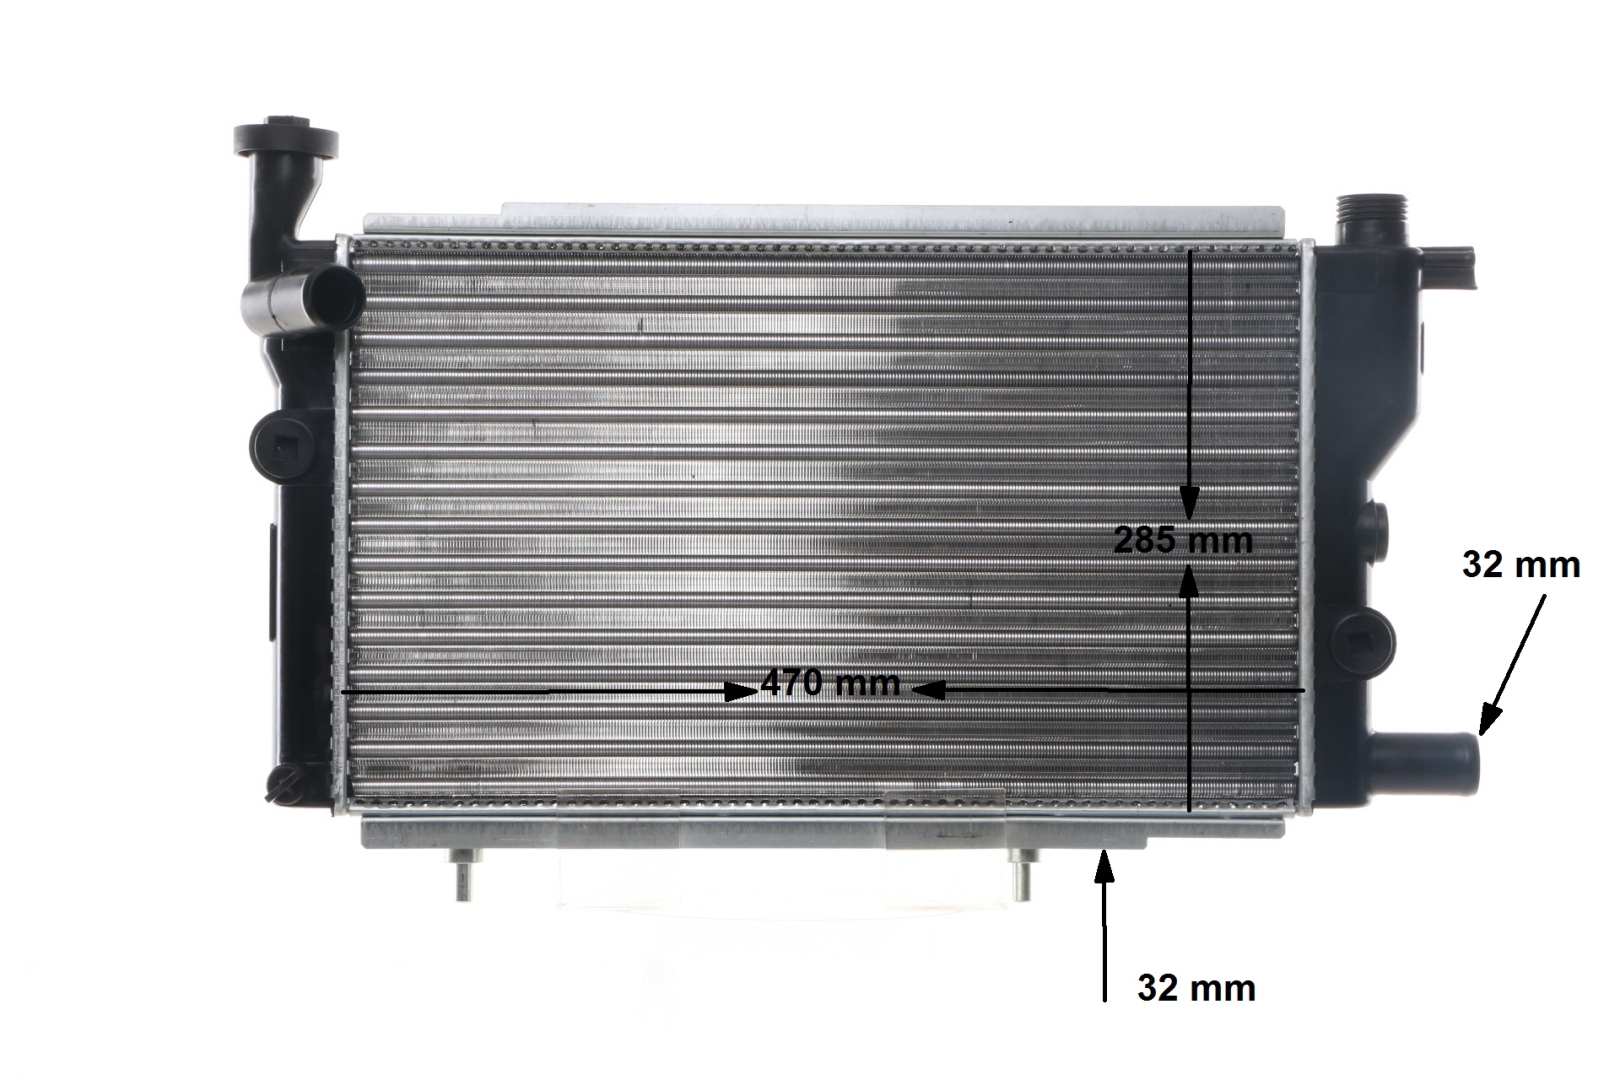 MAHLE ORIGINAL CR 428 000S Engine radiator for vehicles without air conditioning, 470 x 284 x 36 mm, Manual Transmission, Mechanically jointed cooling fins